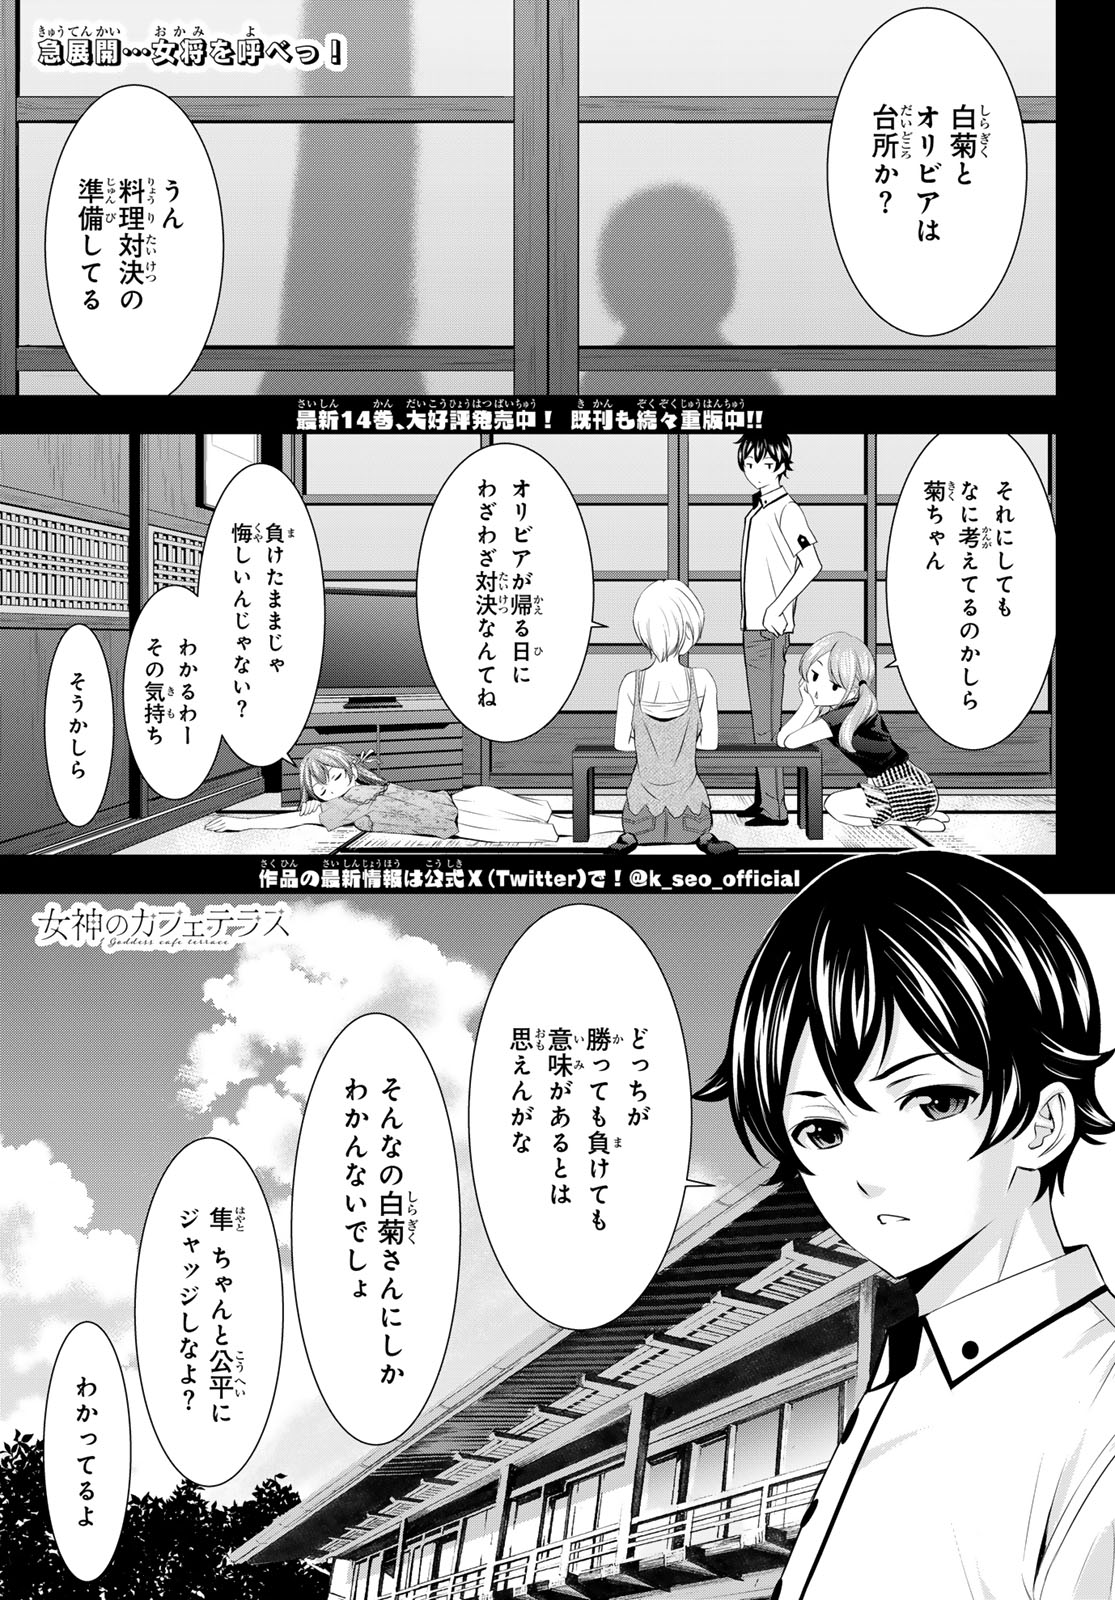 Megami no Cafe Terace - Chapter 145 - Page 1